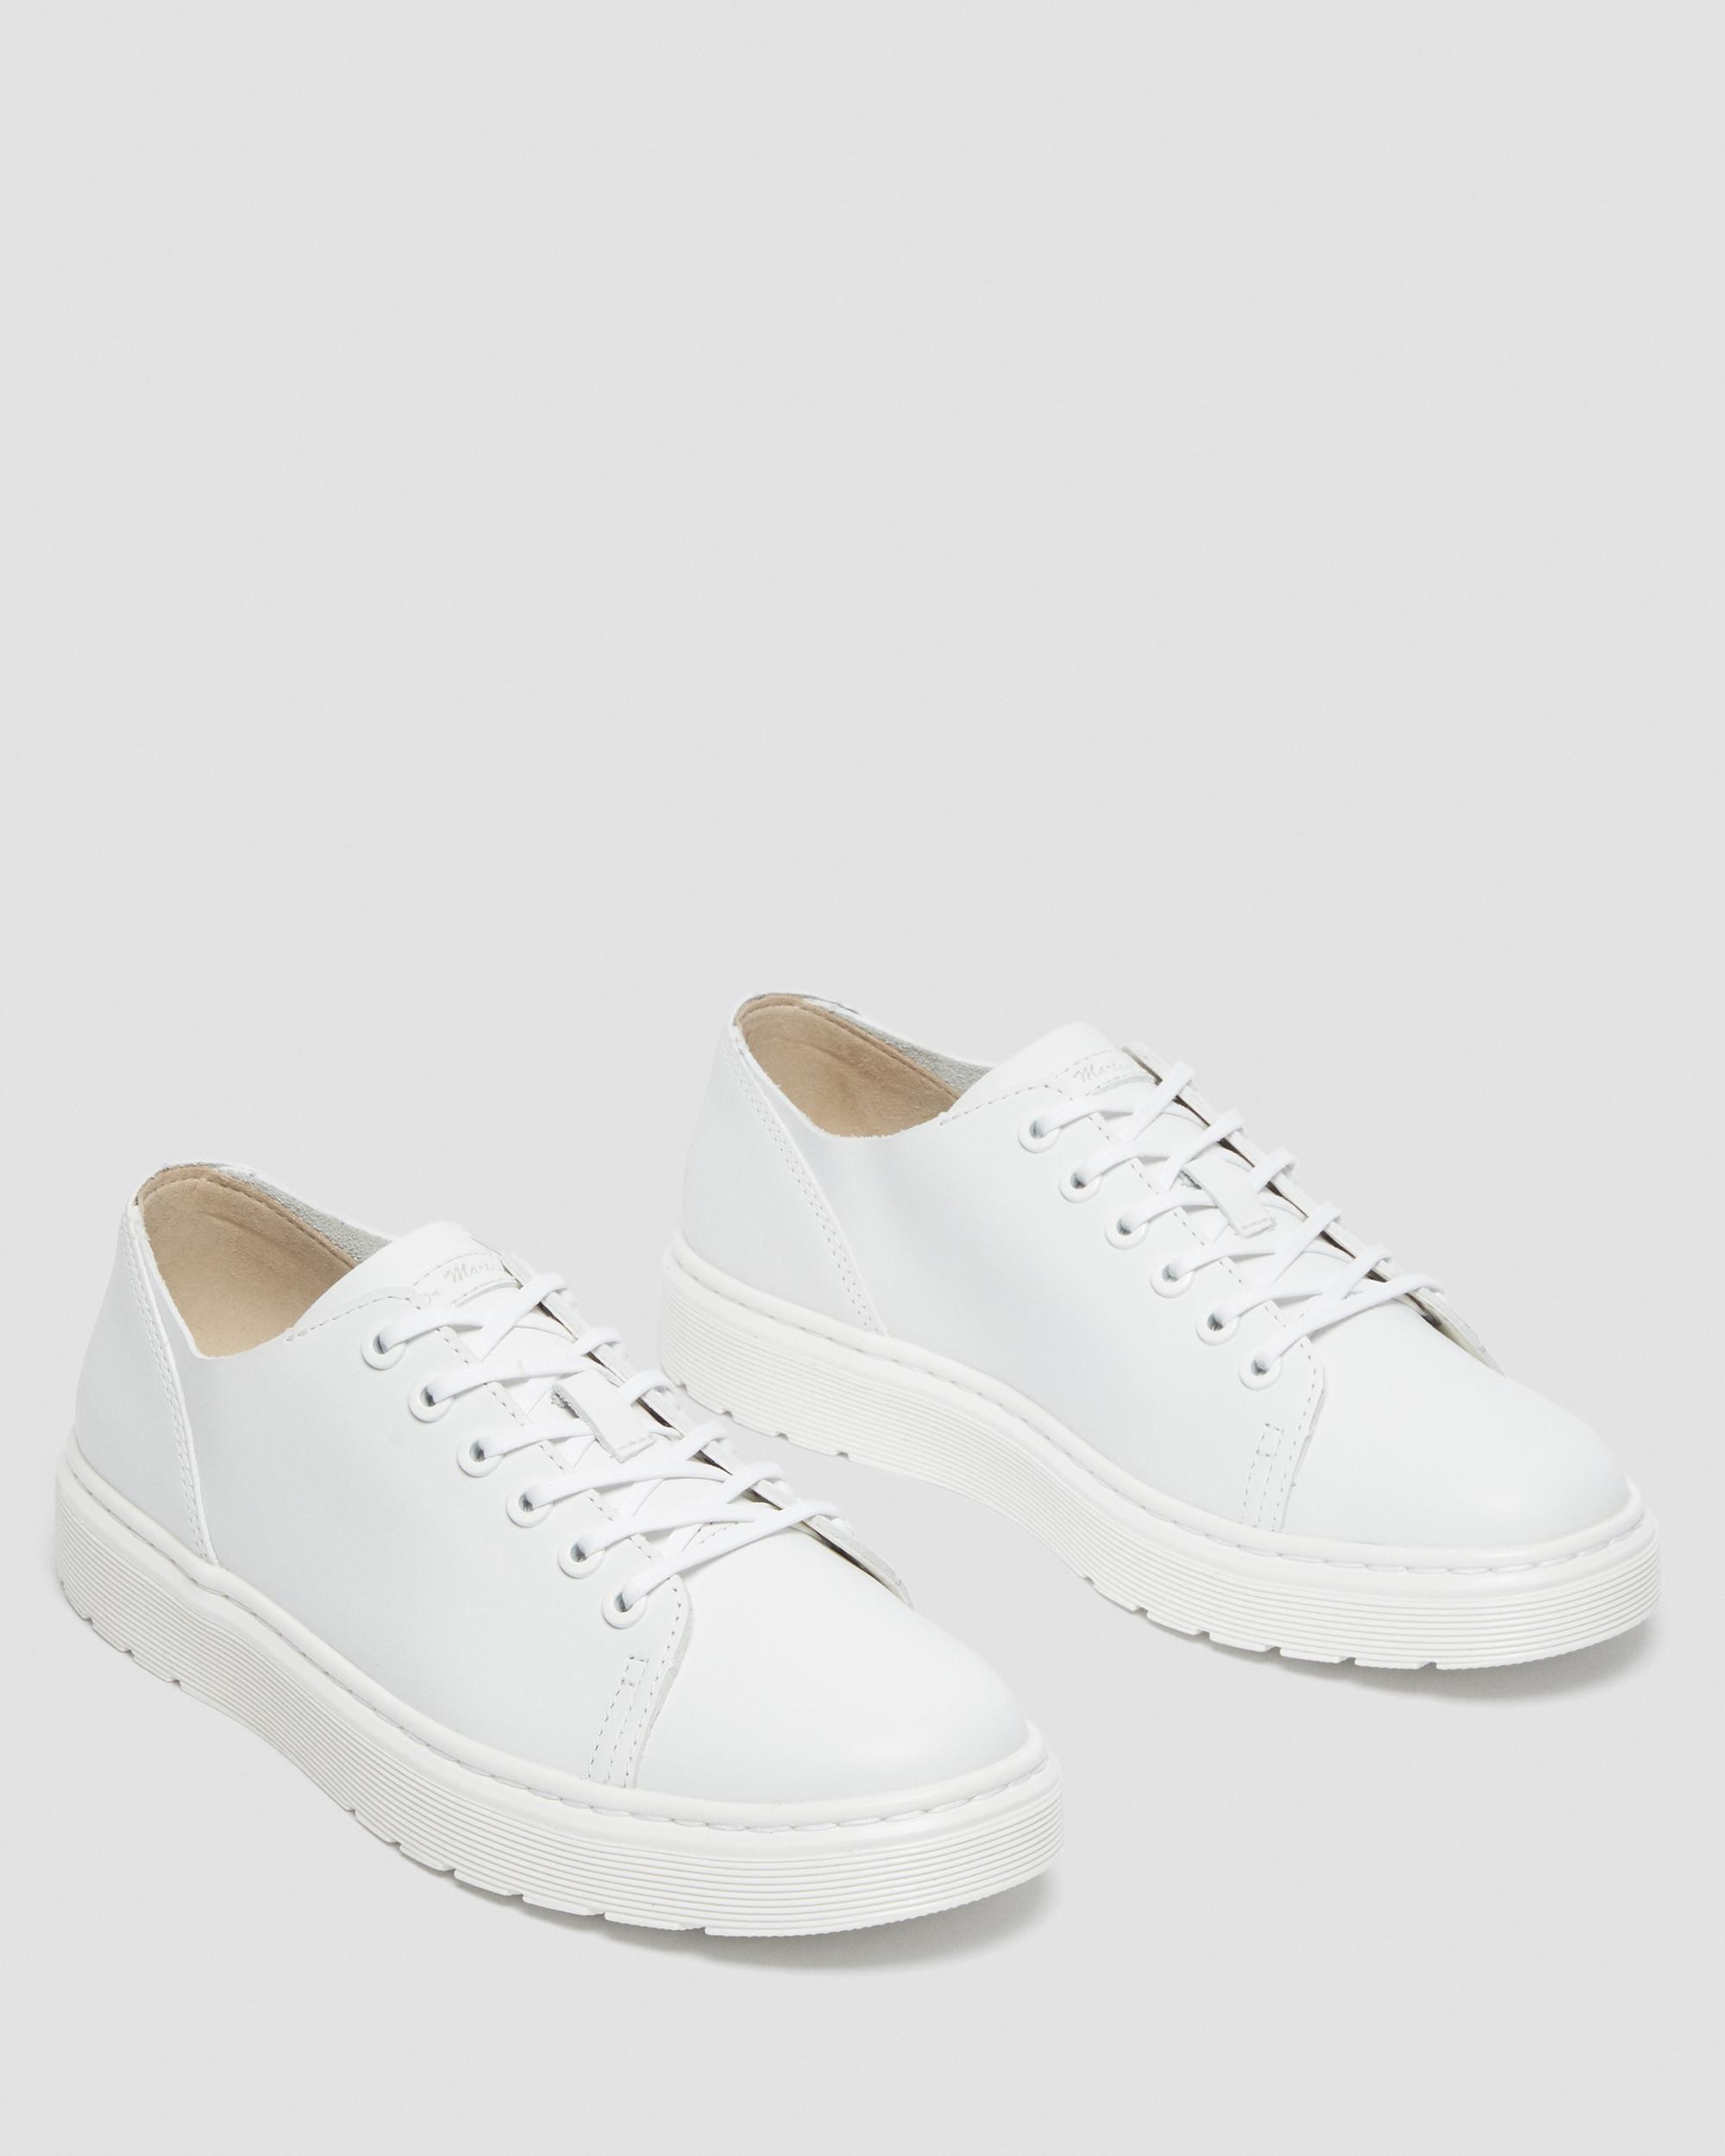 Dante Venice Leather Casual Shoes in White